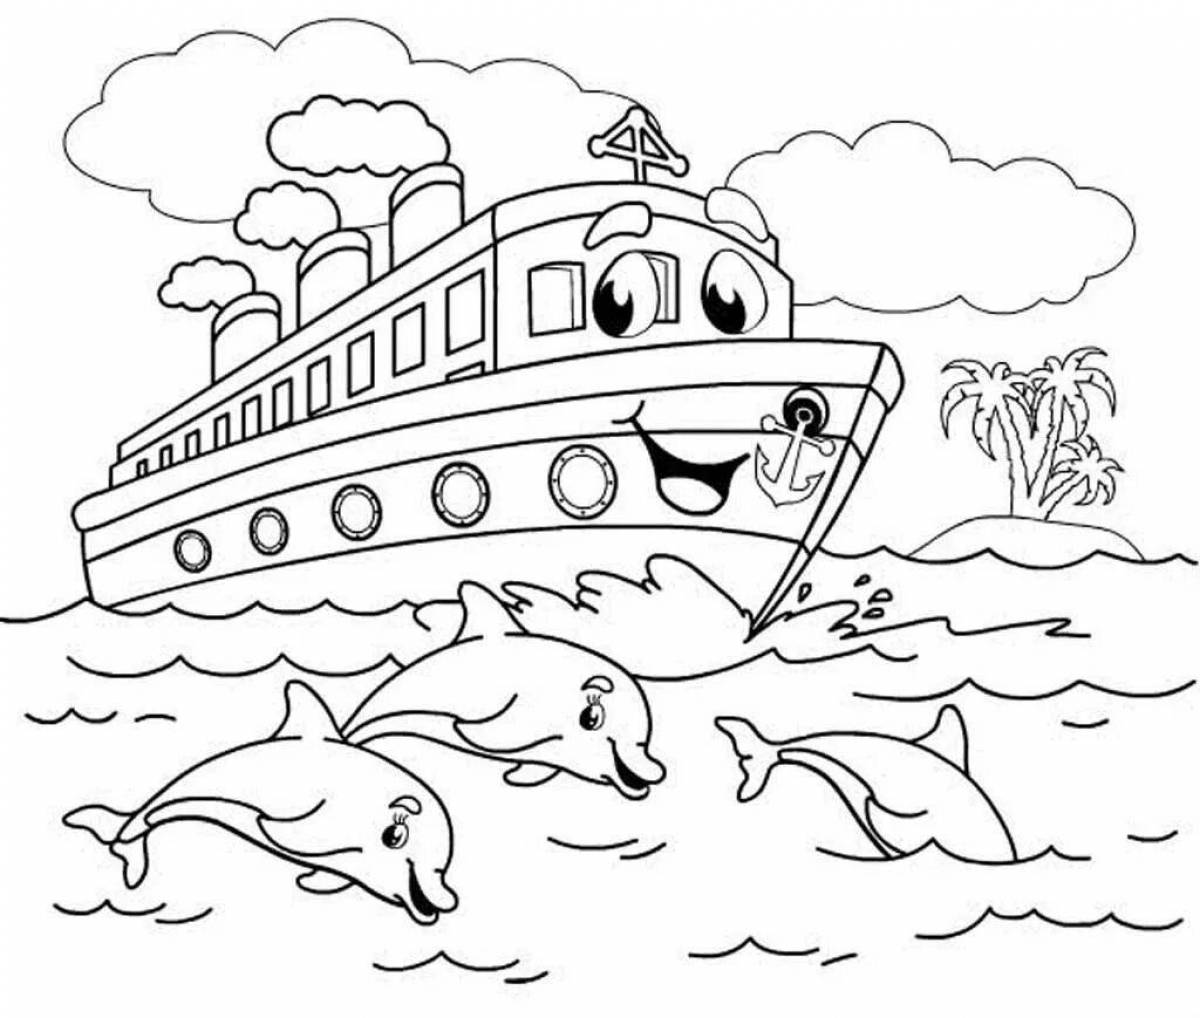 Fairy ship coloring page